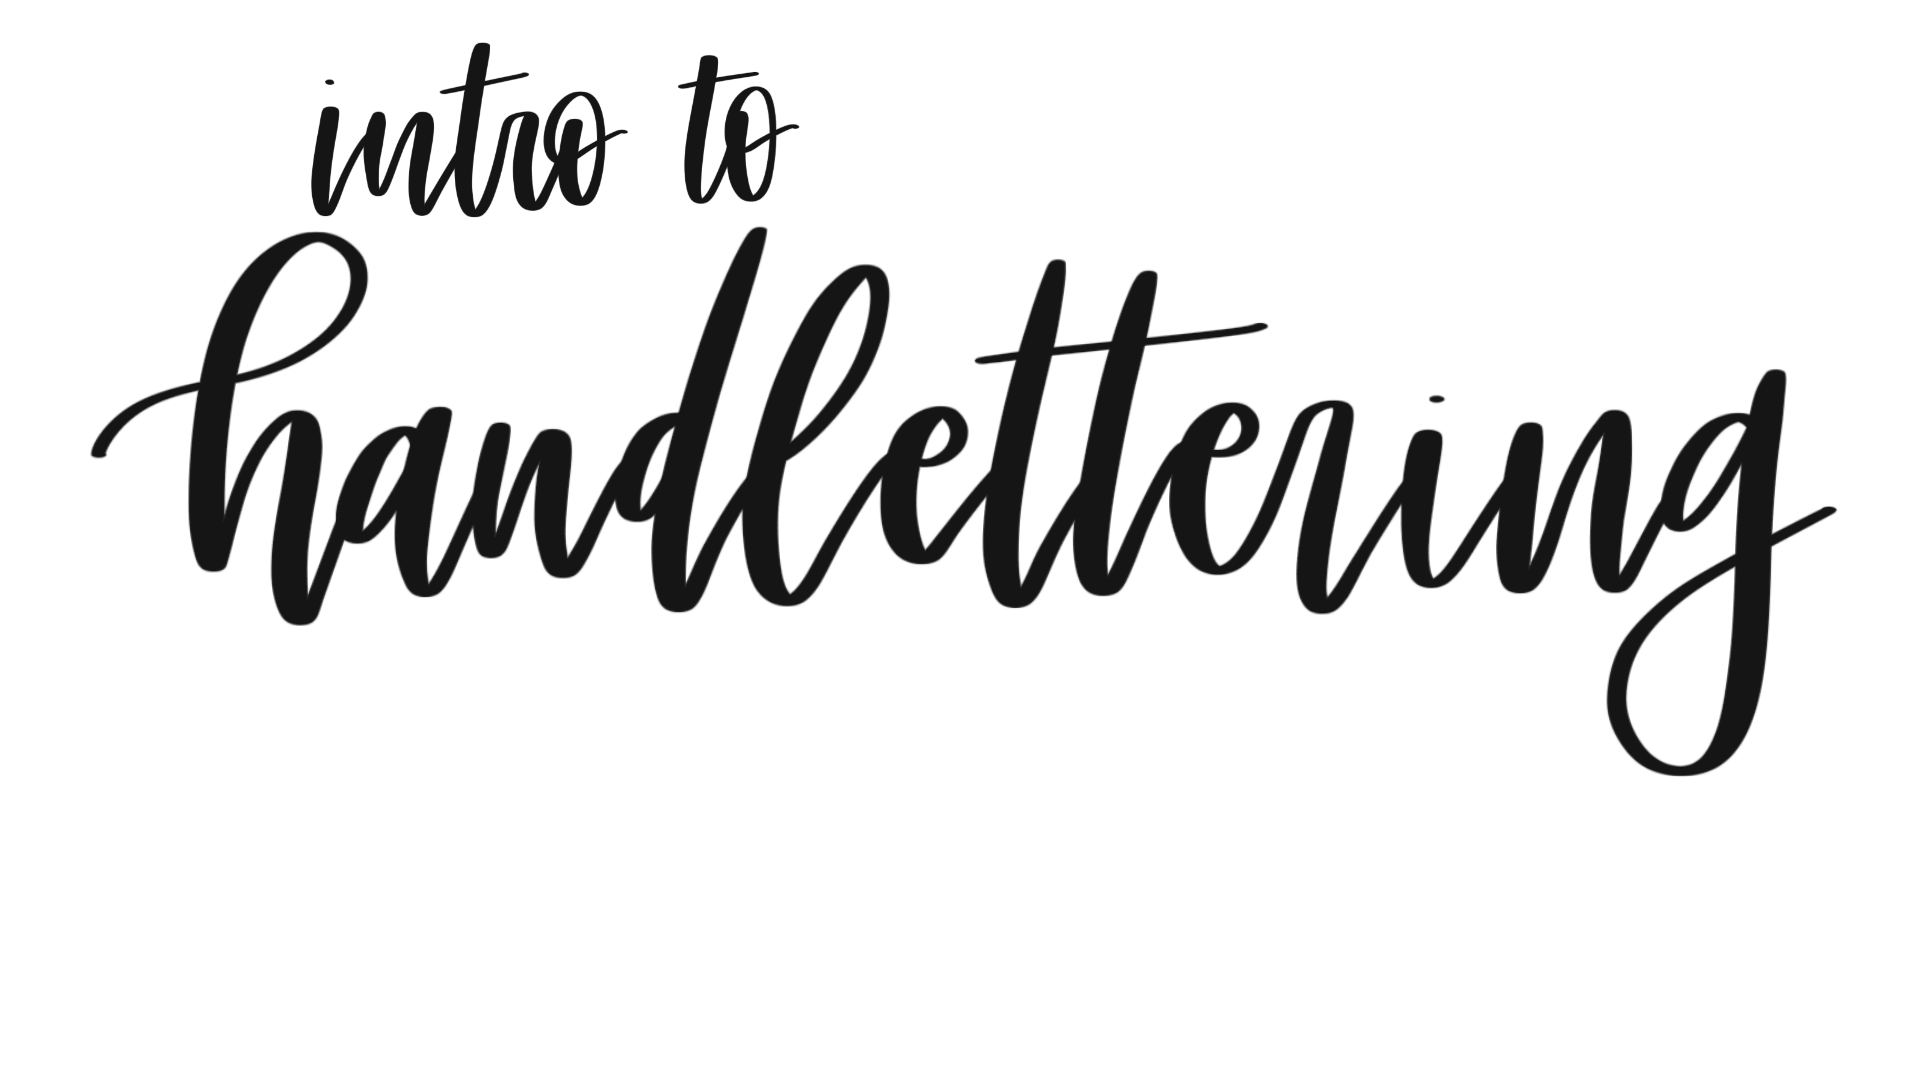 Introduction to Handlettering